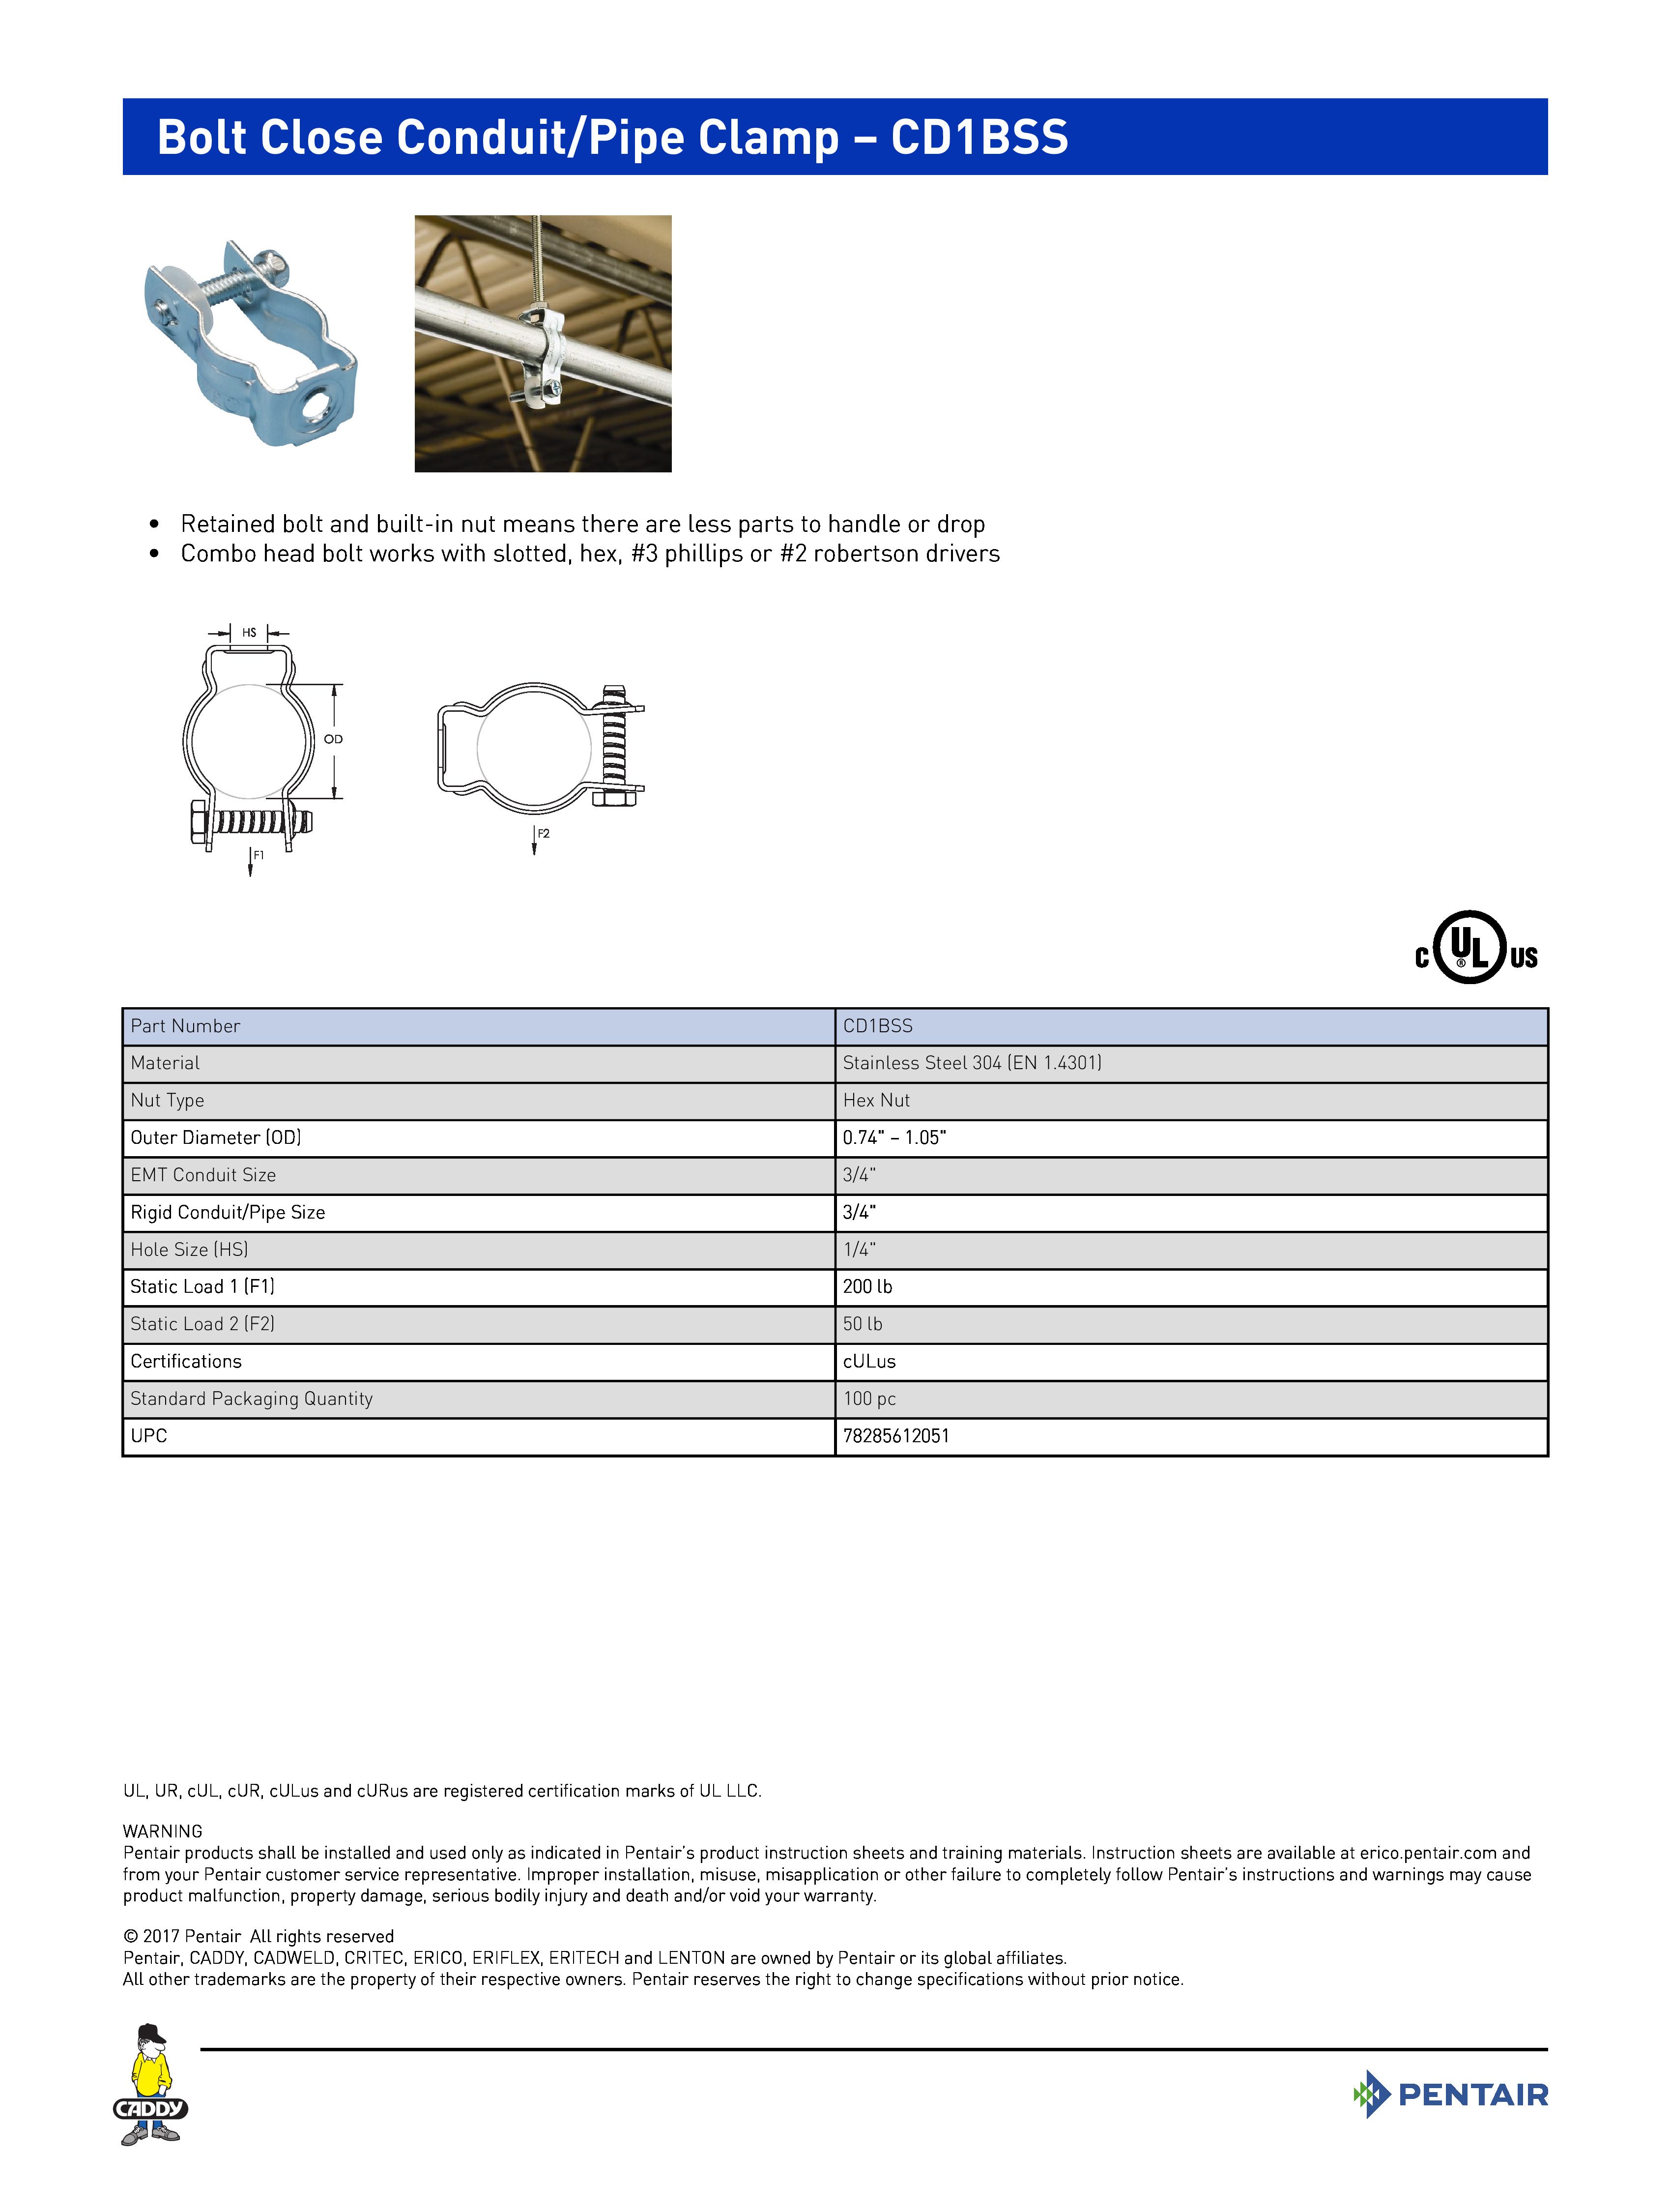 Bolt Close Conduit/Pipe Clamp – CD1BSS	
 	
•	Retained bolt and built-in nut means there are less parts to handle or drop	
•	Combo head bolt works with slotted, hex, #3 phillips or #2 robertson drivers	
 	
Part NumberCD1BSSMaterialStainless Steel 304 (EN 1.4301)Nut TypeHex NutOuter Diameter (OD)0.74" – 1.05"EMT Conduit Size3/4"Rigid Conduit/Pipe Size3/4"Hole Size (HS)1/4"Static Load 1 (F1)200 lbStatic Load 2 (F2)50 lbCertificationscULusStandard Packaging Quantity100 pcUPC78285612051
UL, UR, cUL, cUR, cULus and cURus are registered certification marks of UL LLC. WARNINGPentair products shall be installed and used only as indicated in Pentair’s product instruction sheets and training materials. Instruction sheets are available at erico.pentair.com andfrom your Pentair customer service representative. Improper installation, misuse, misapplication or other failure to completely follow Pentair’s instructions and warnings may causeproduct malfunction, property damage, serious bodily injury and death and/or void your warranty. 